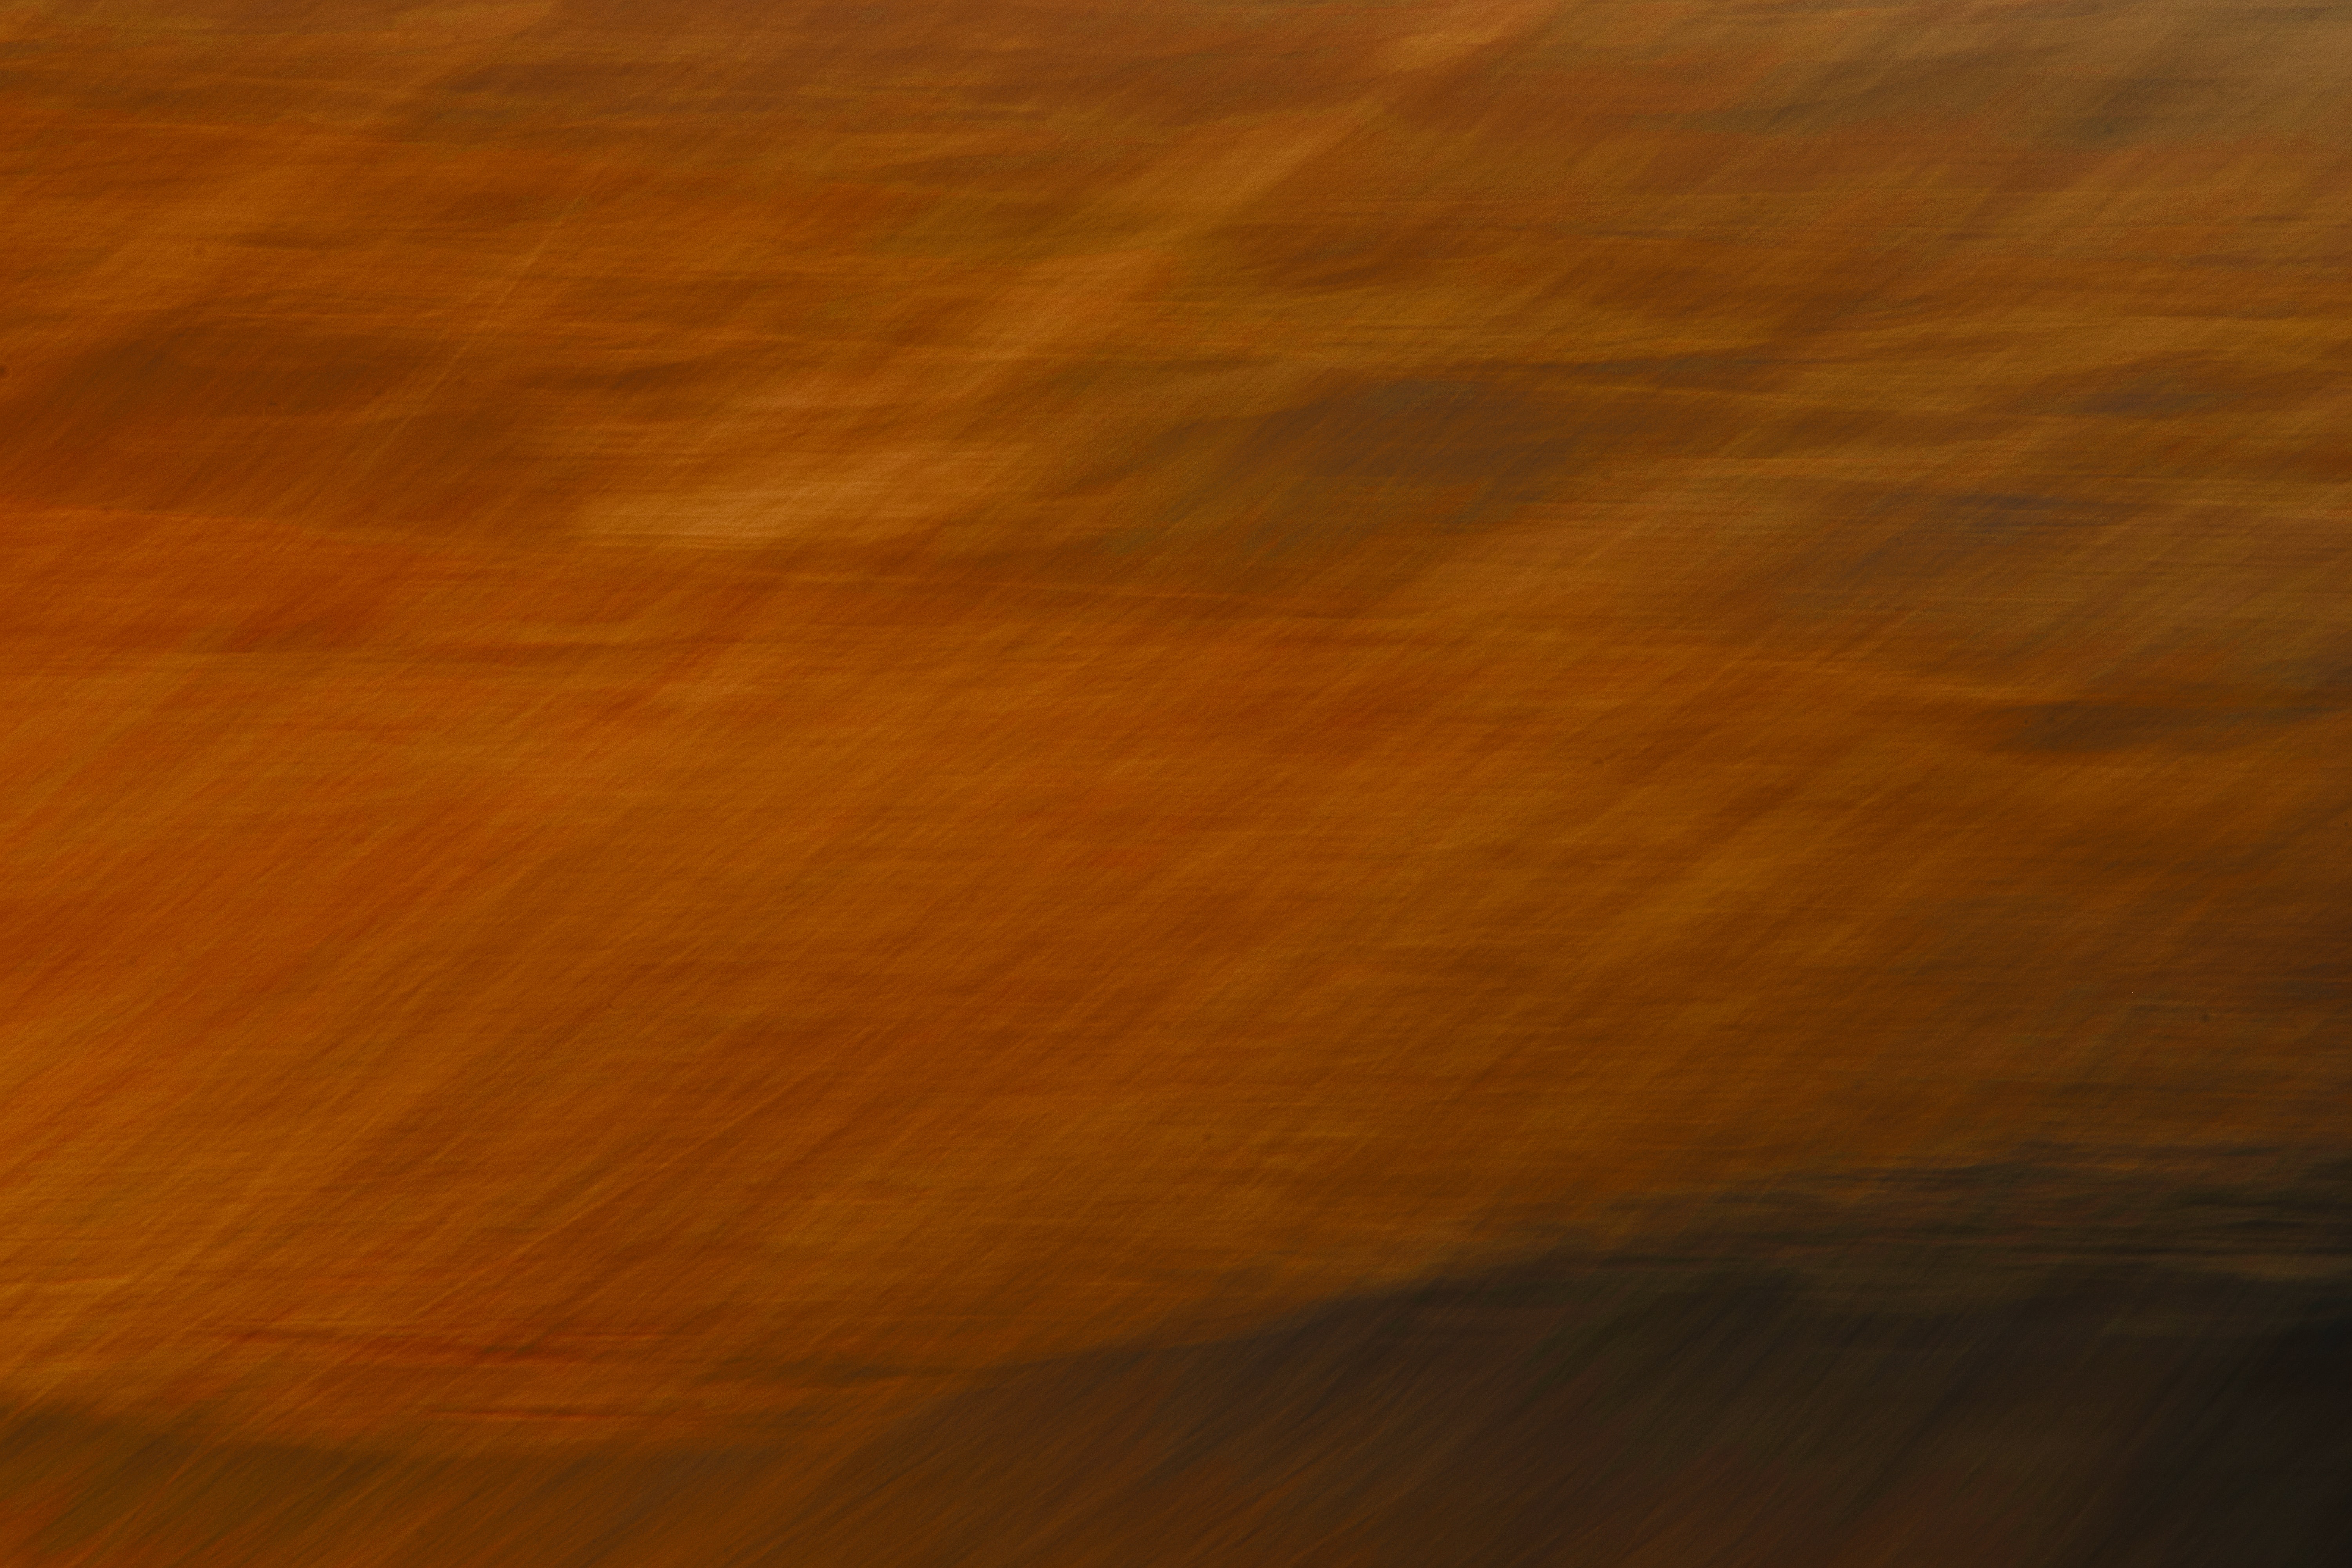 brown, blur, background, abstract, smooth